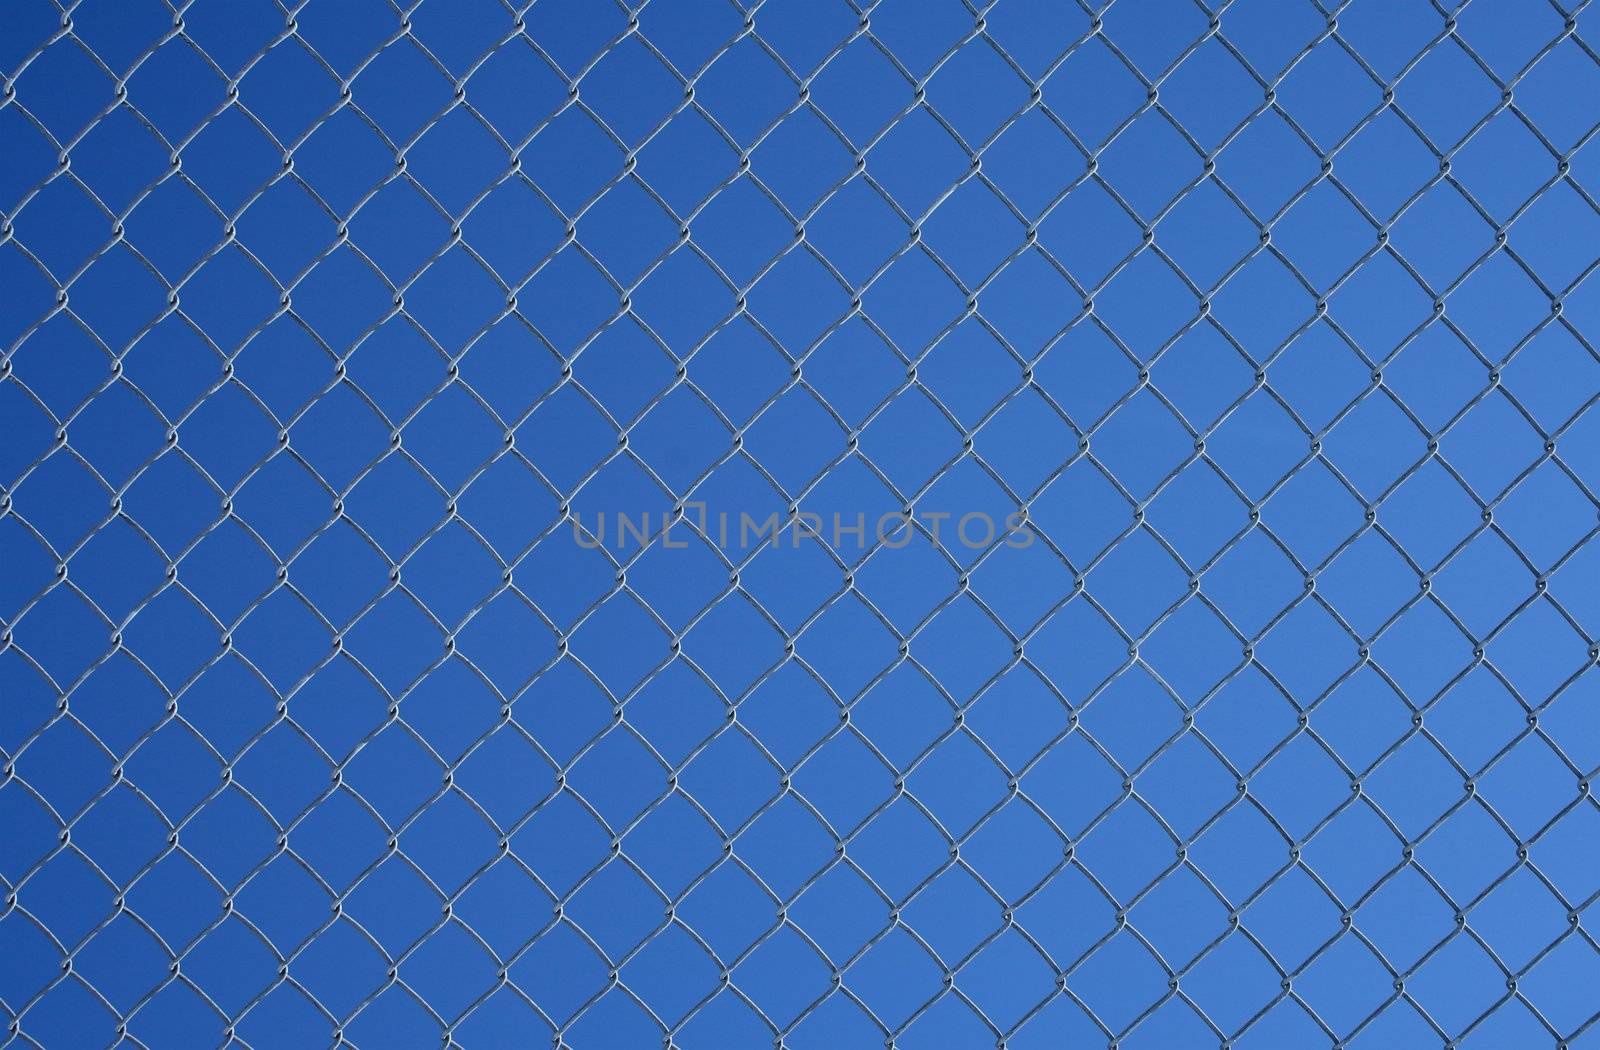 Gray chain link fence on a blue sky background.